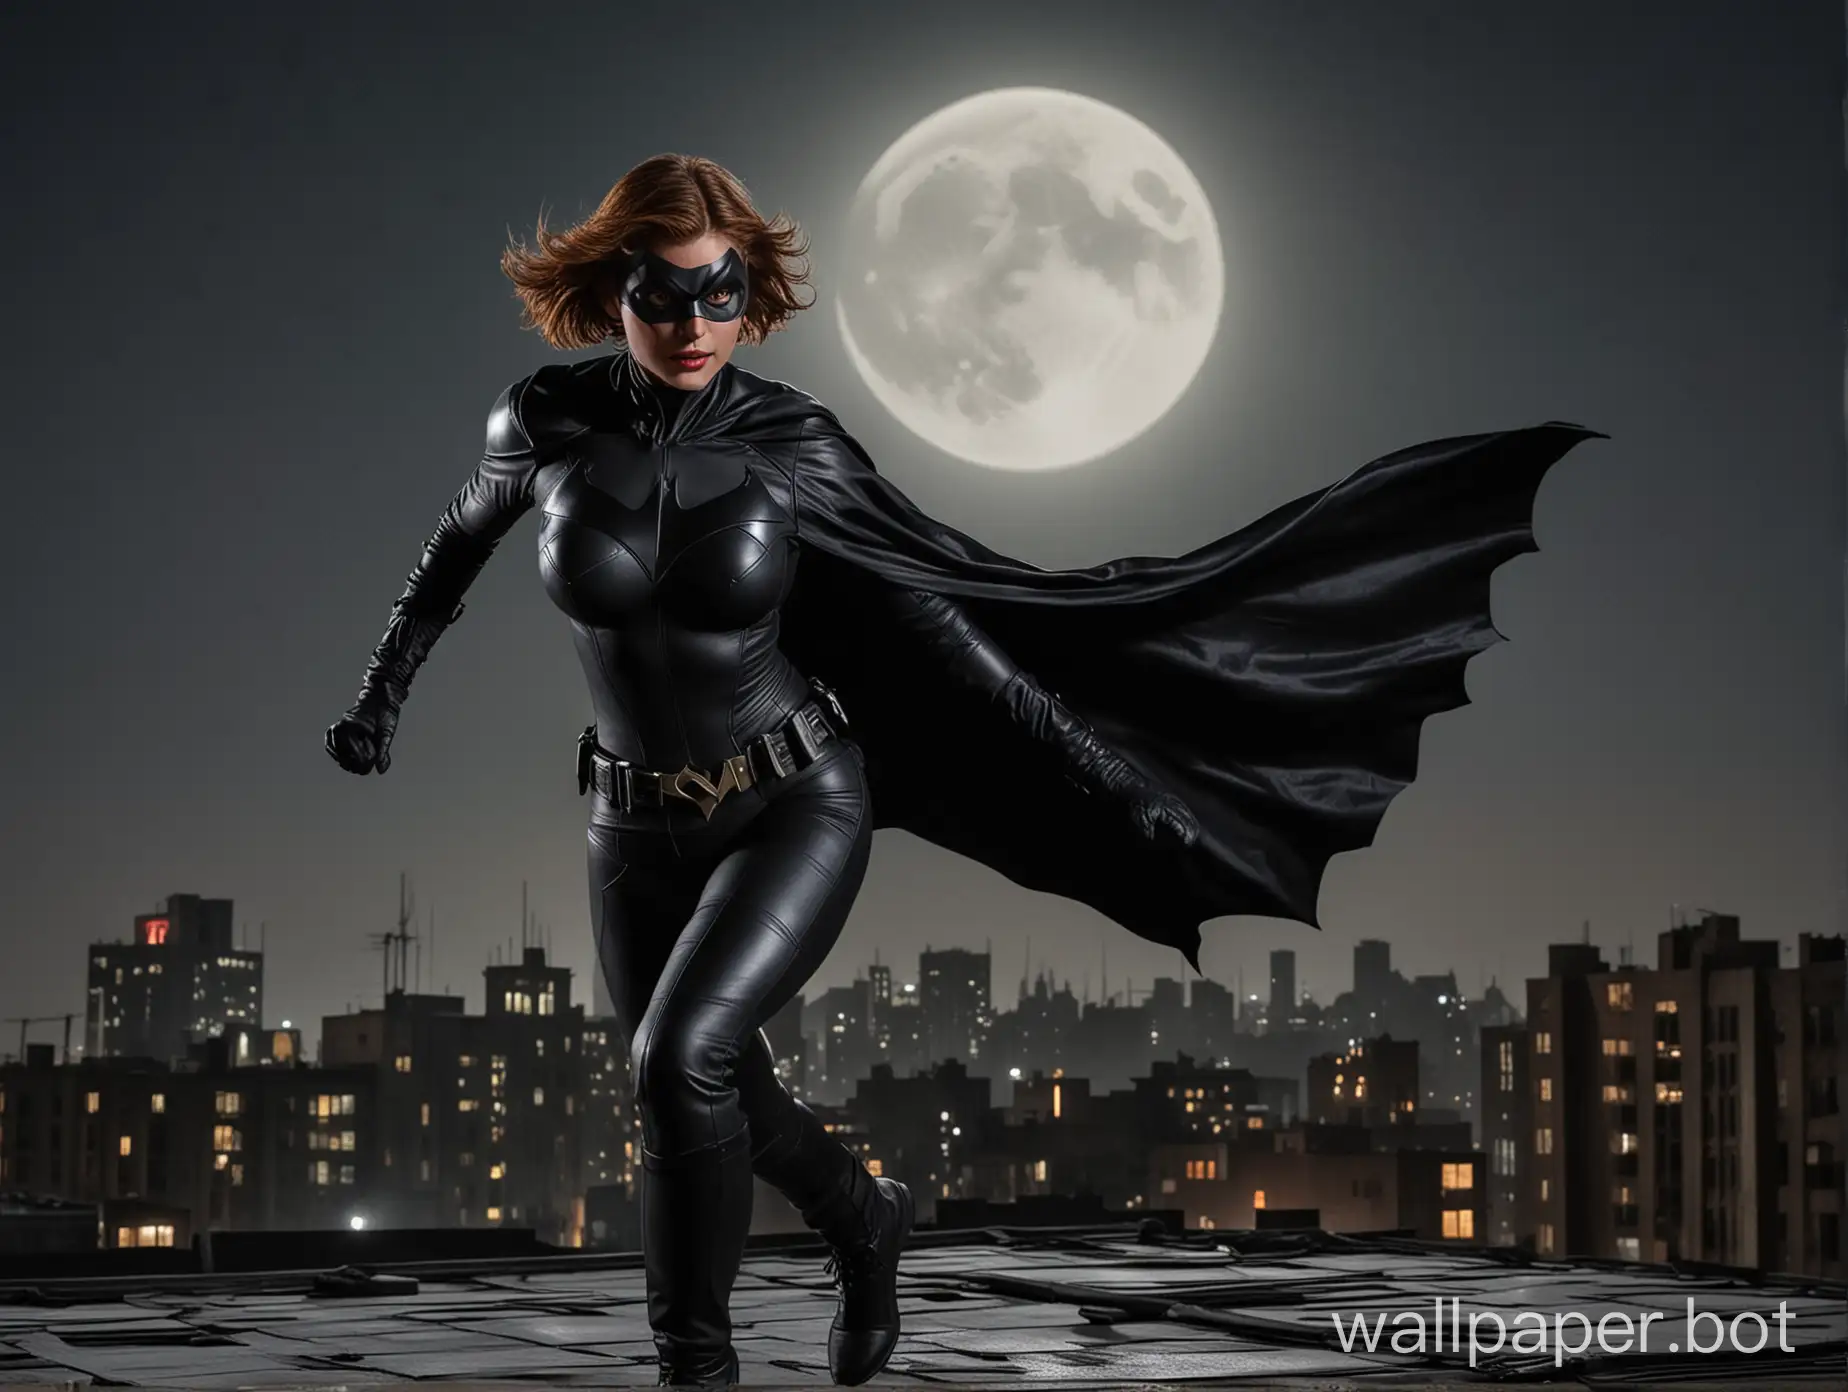 batwoman with large breasts, with short hair, in black leather suit running on the roof of a building, bright moon shining, dark background, black cape unfurls